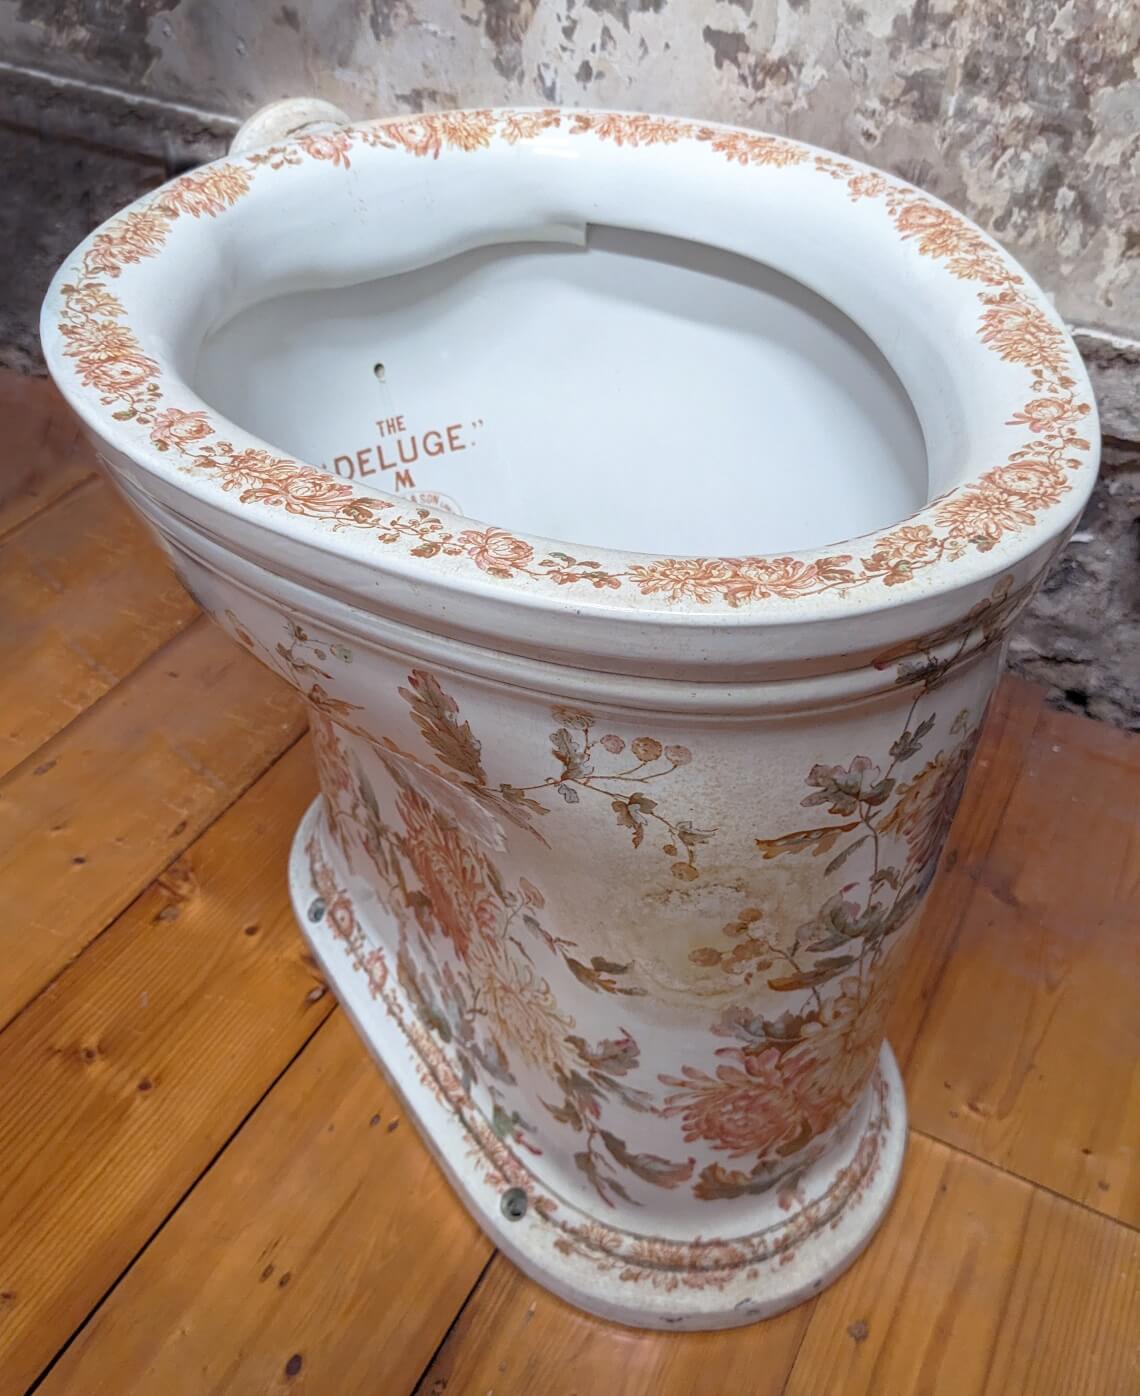 Decorated lavatory. This old toilet is covered in orange and yellow chrysanthemum flowers. It is standing free from the wall, and obviously no longer connected to plumbing.